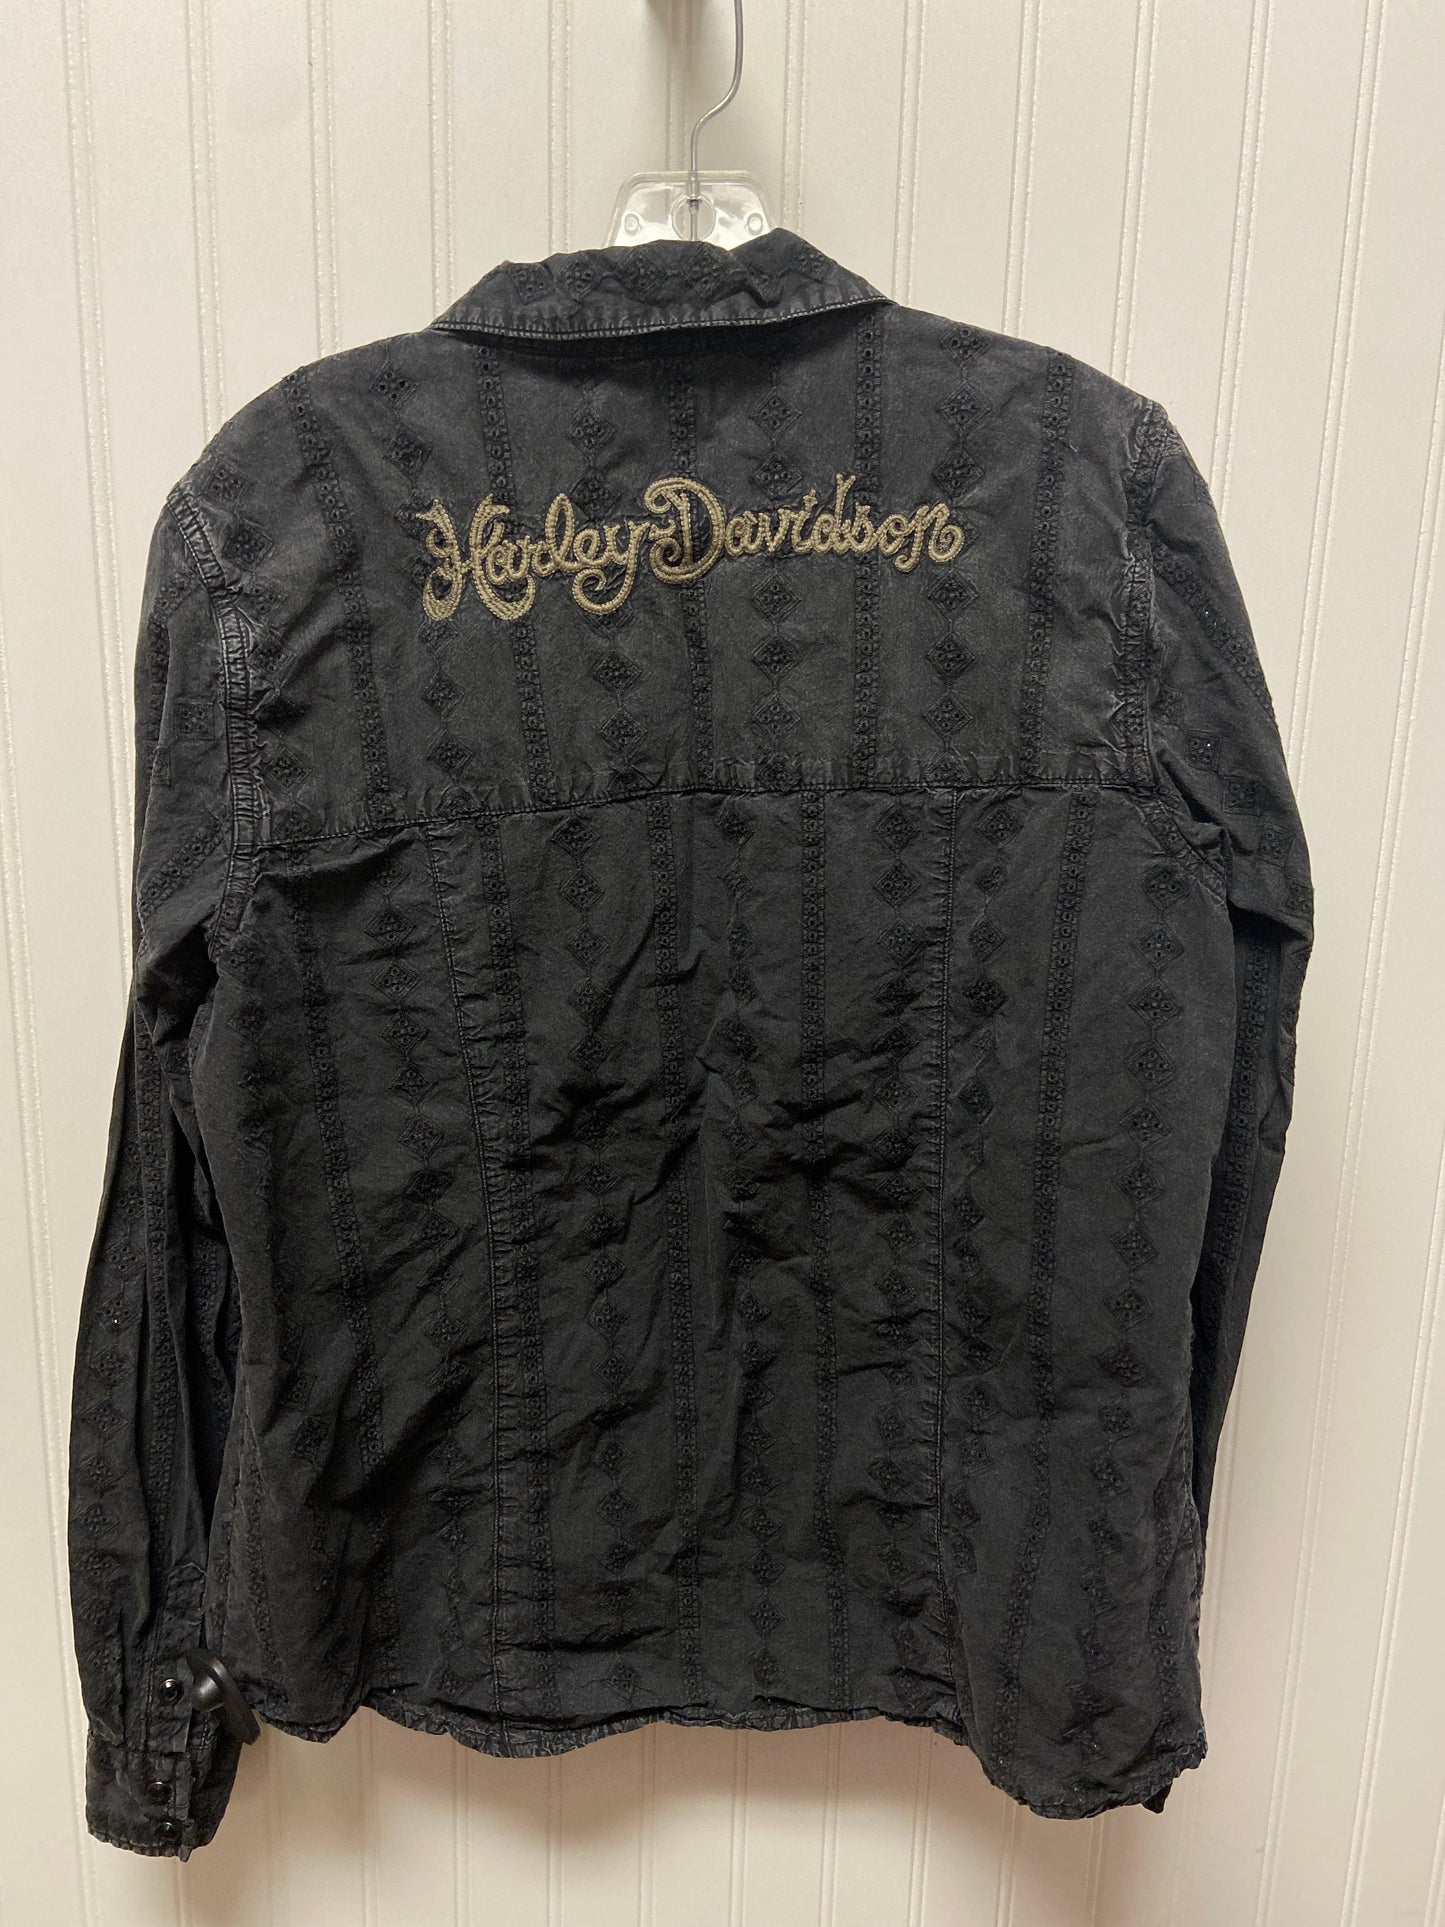 Top Long Sleeve By Harley Davidson  Size: Xl